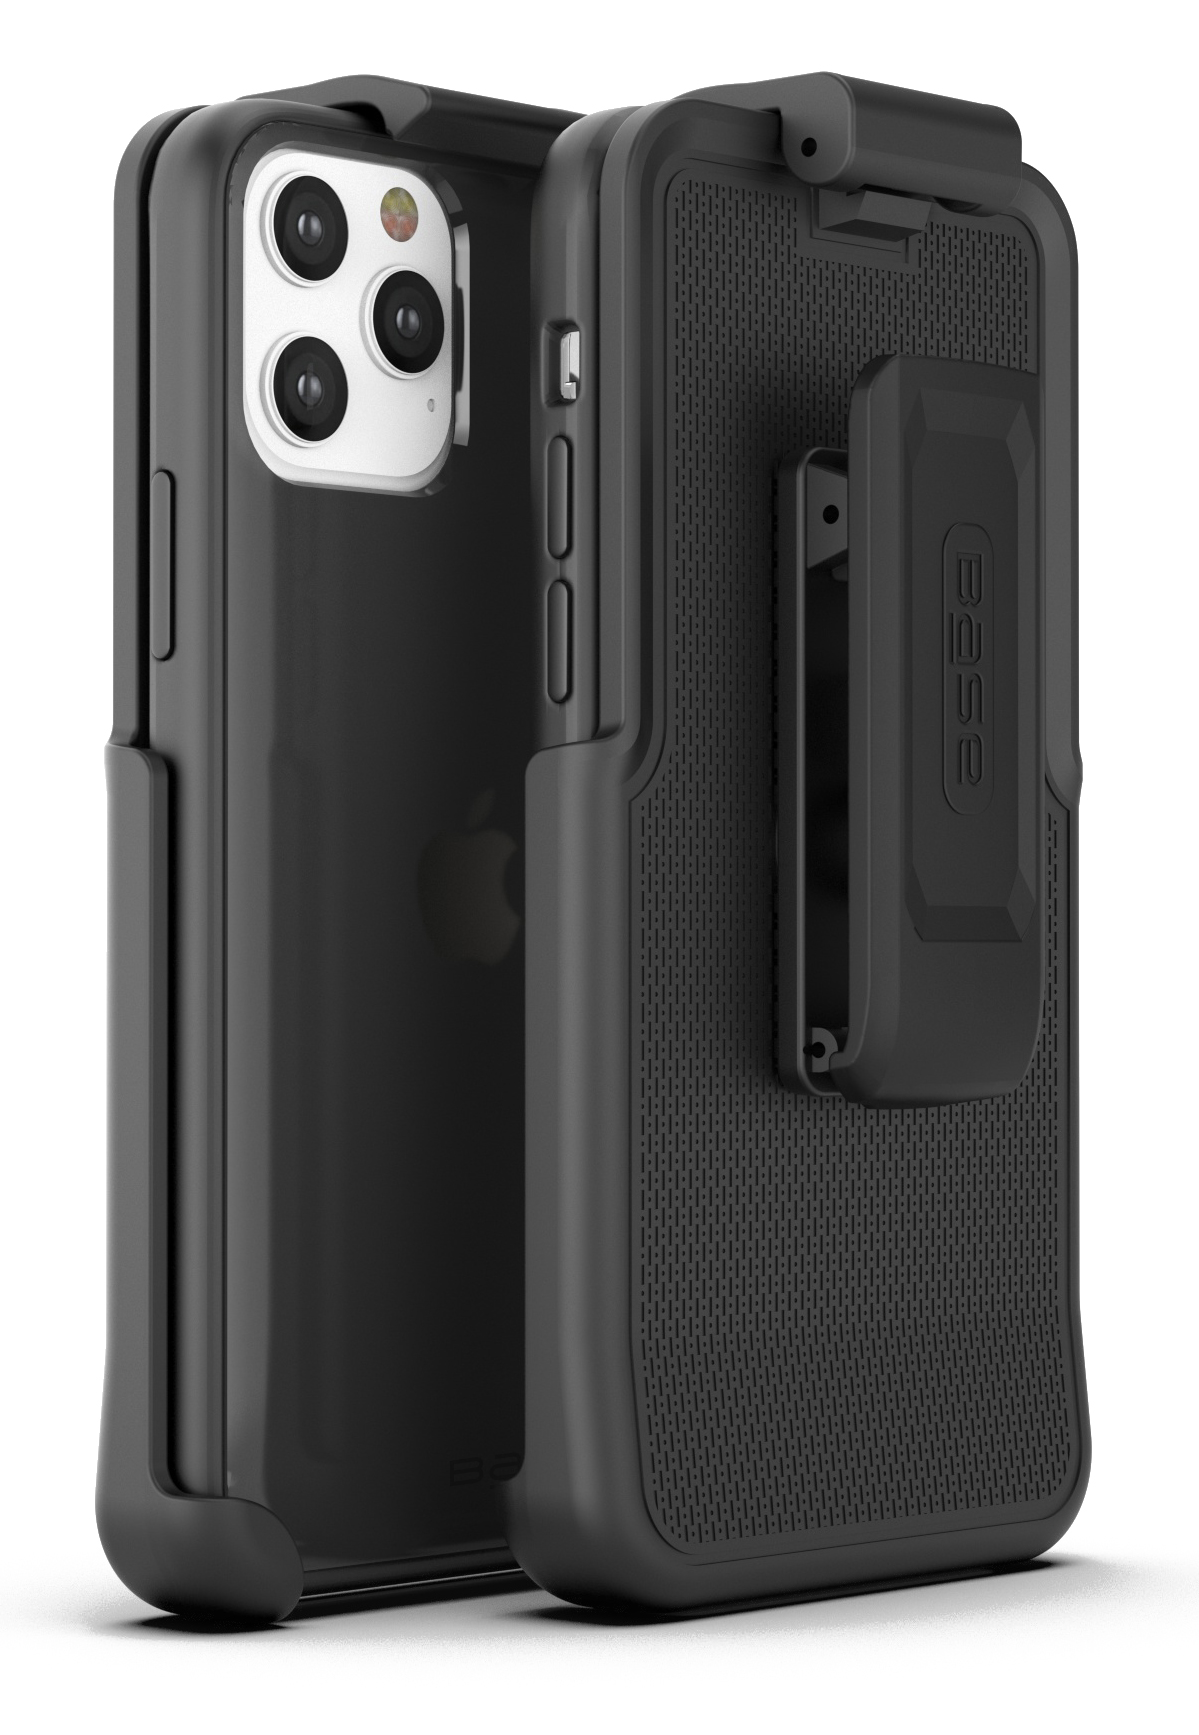 Two-Piece black protective case with belt clip holster for iPhone 12 / iPhone 12 Pro cell phones